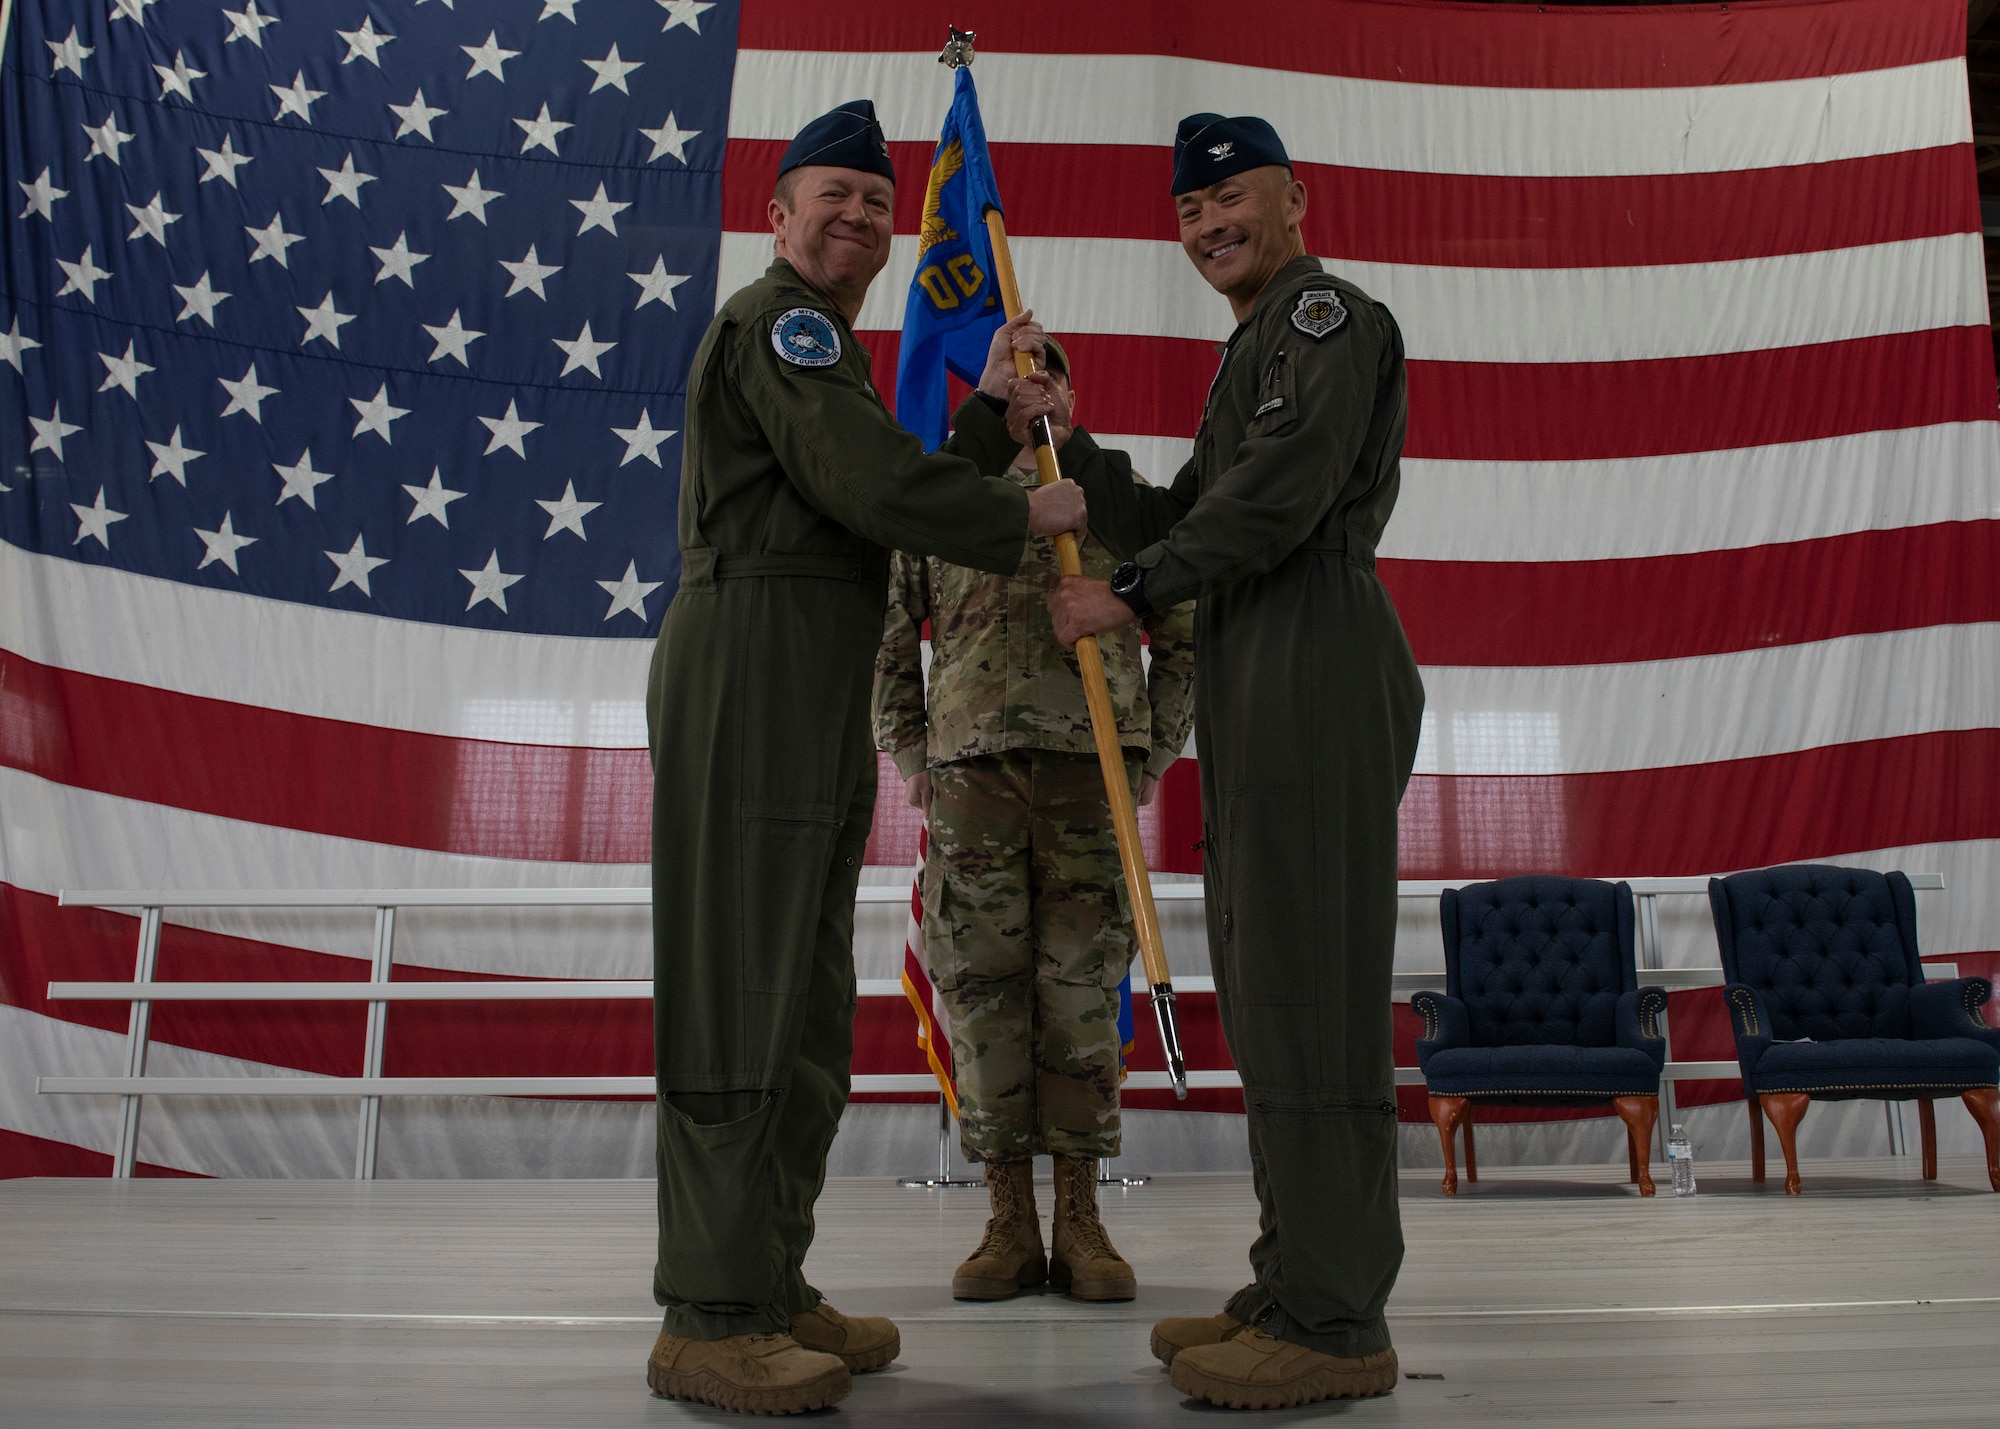 An Airman passes the ceremonial guidon to another Airman.